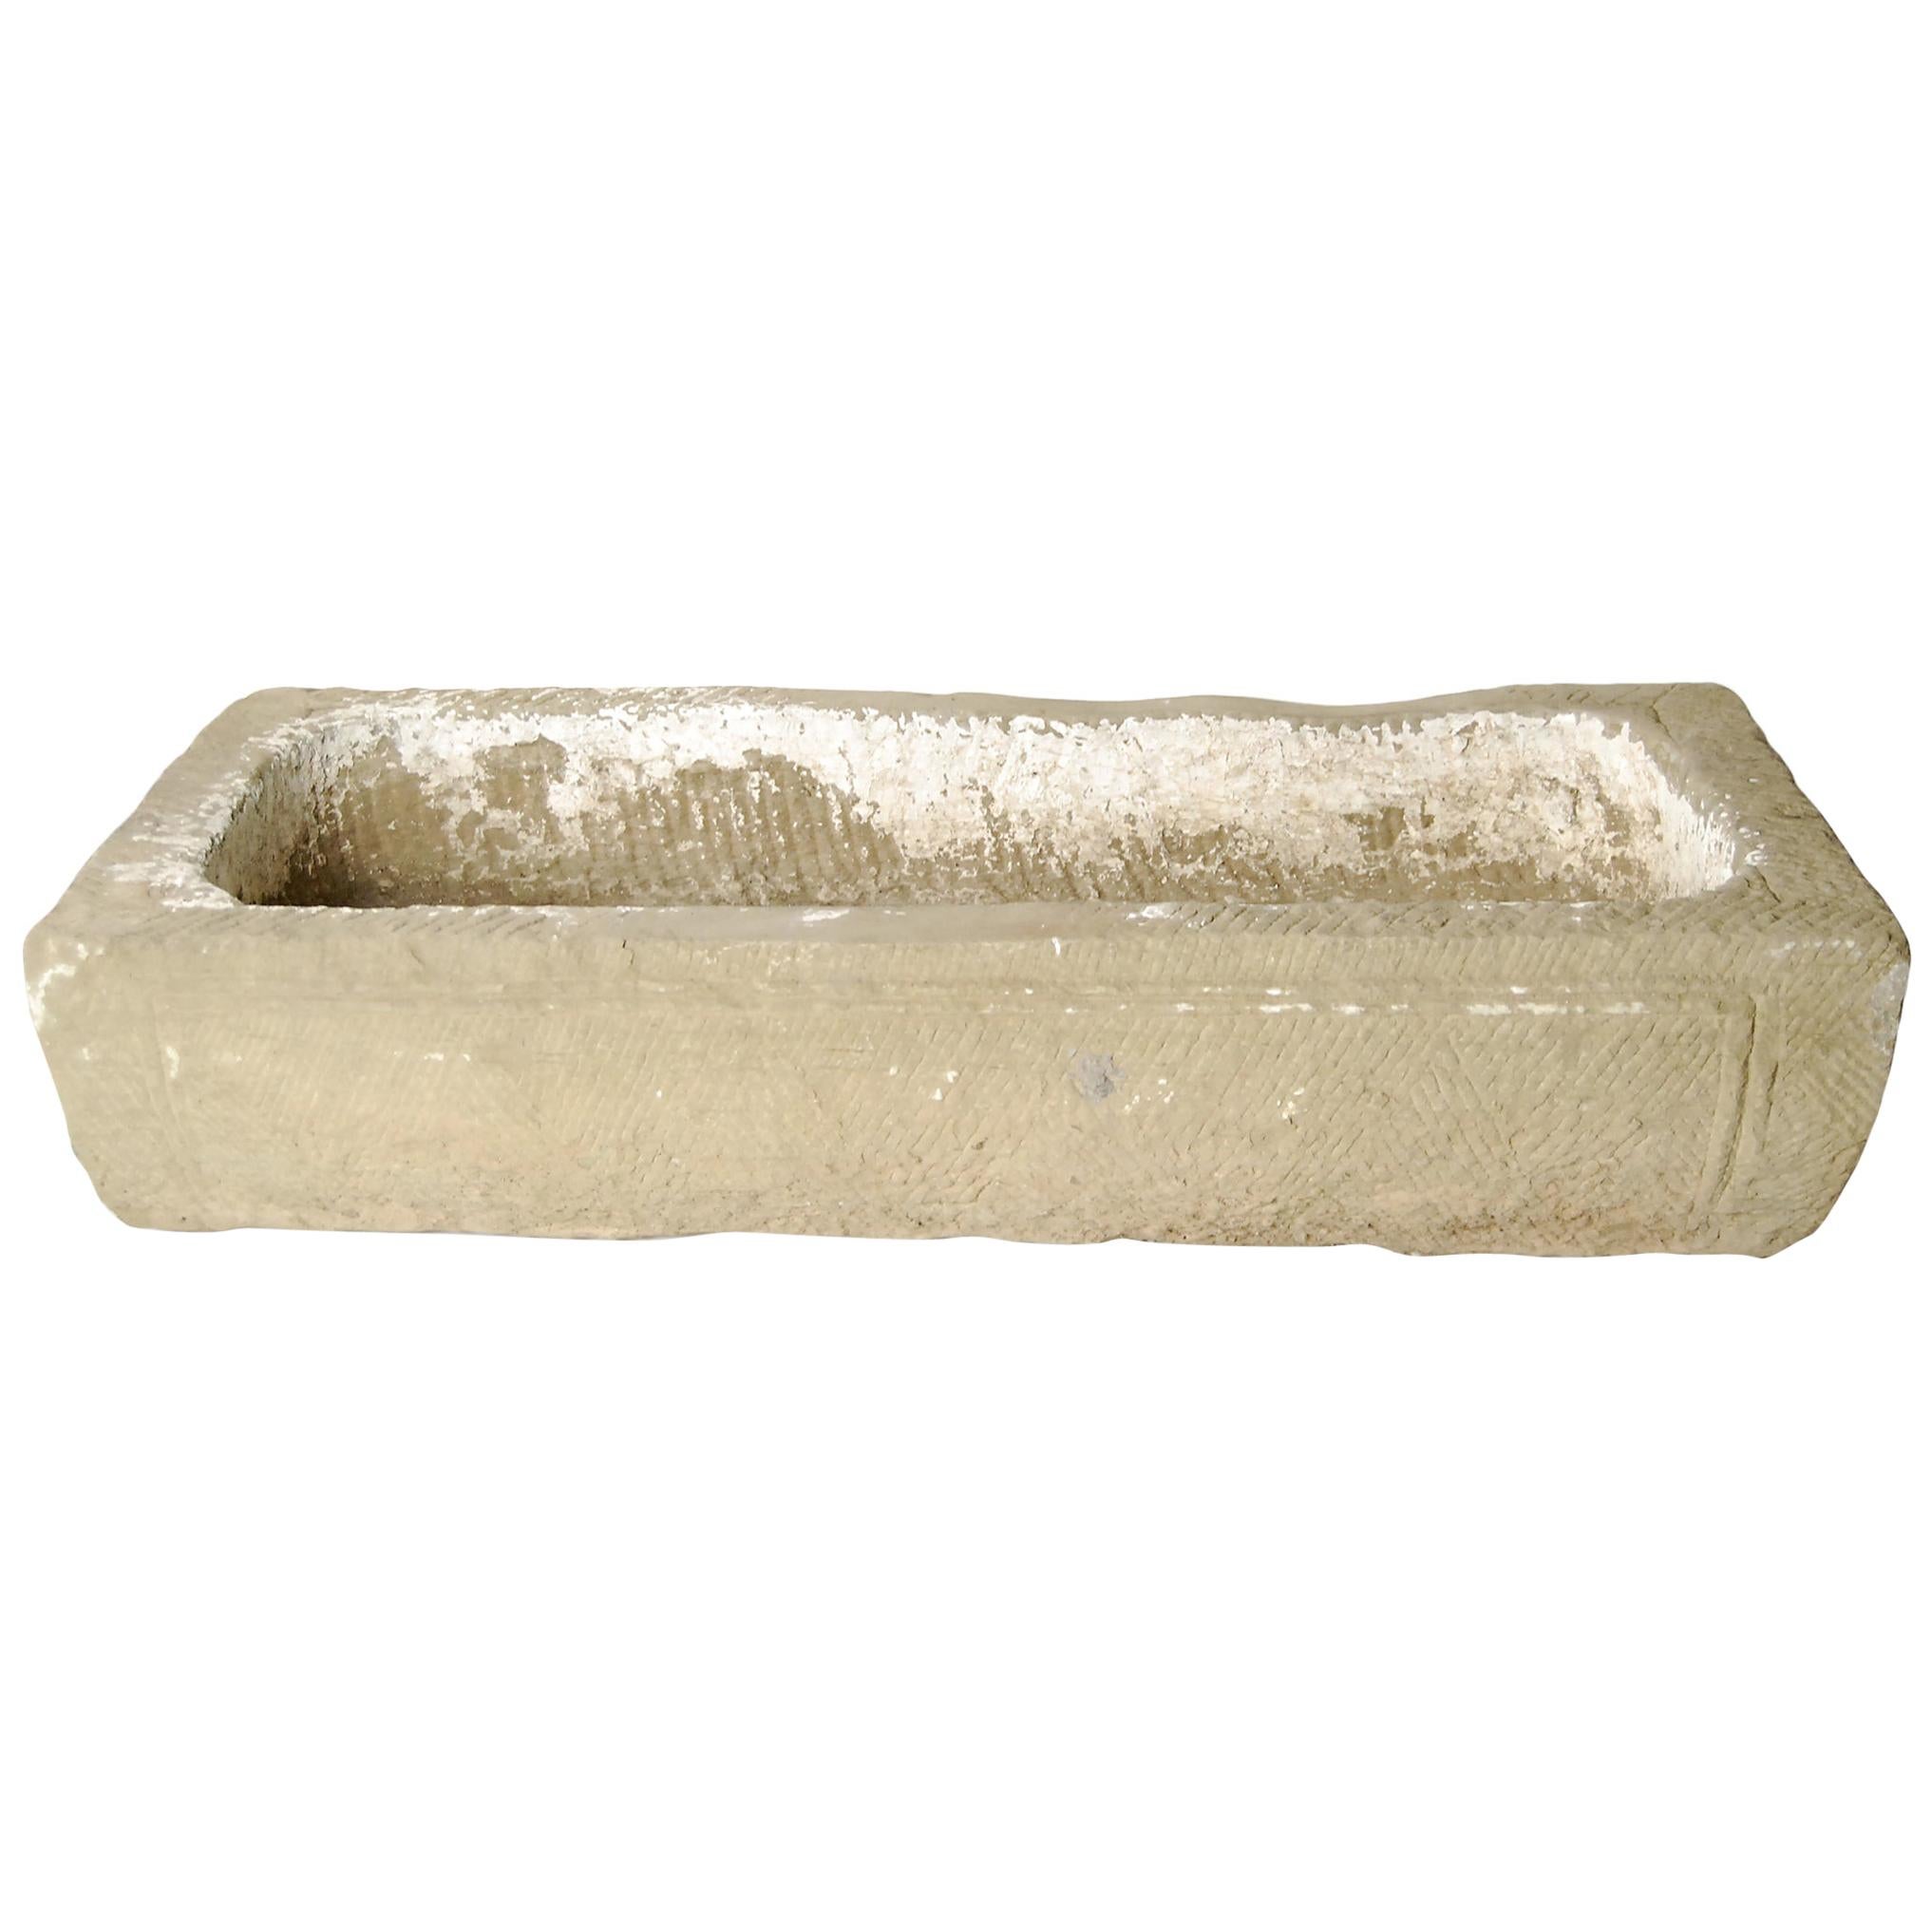 Chinese Etched Limestone Trough, c. 1800 For Sale